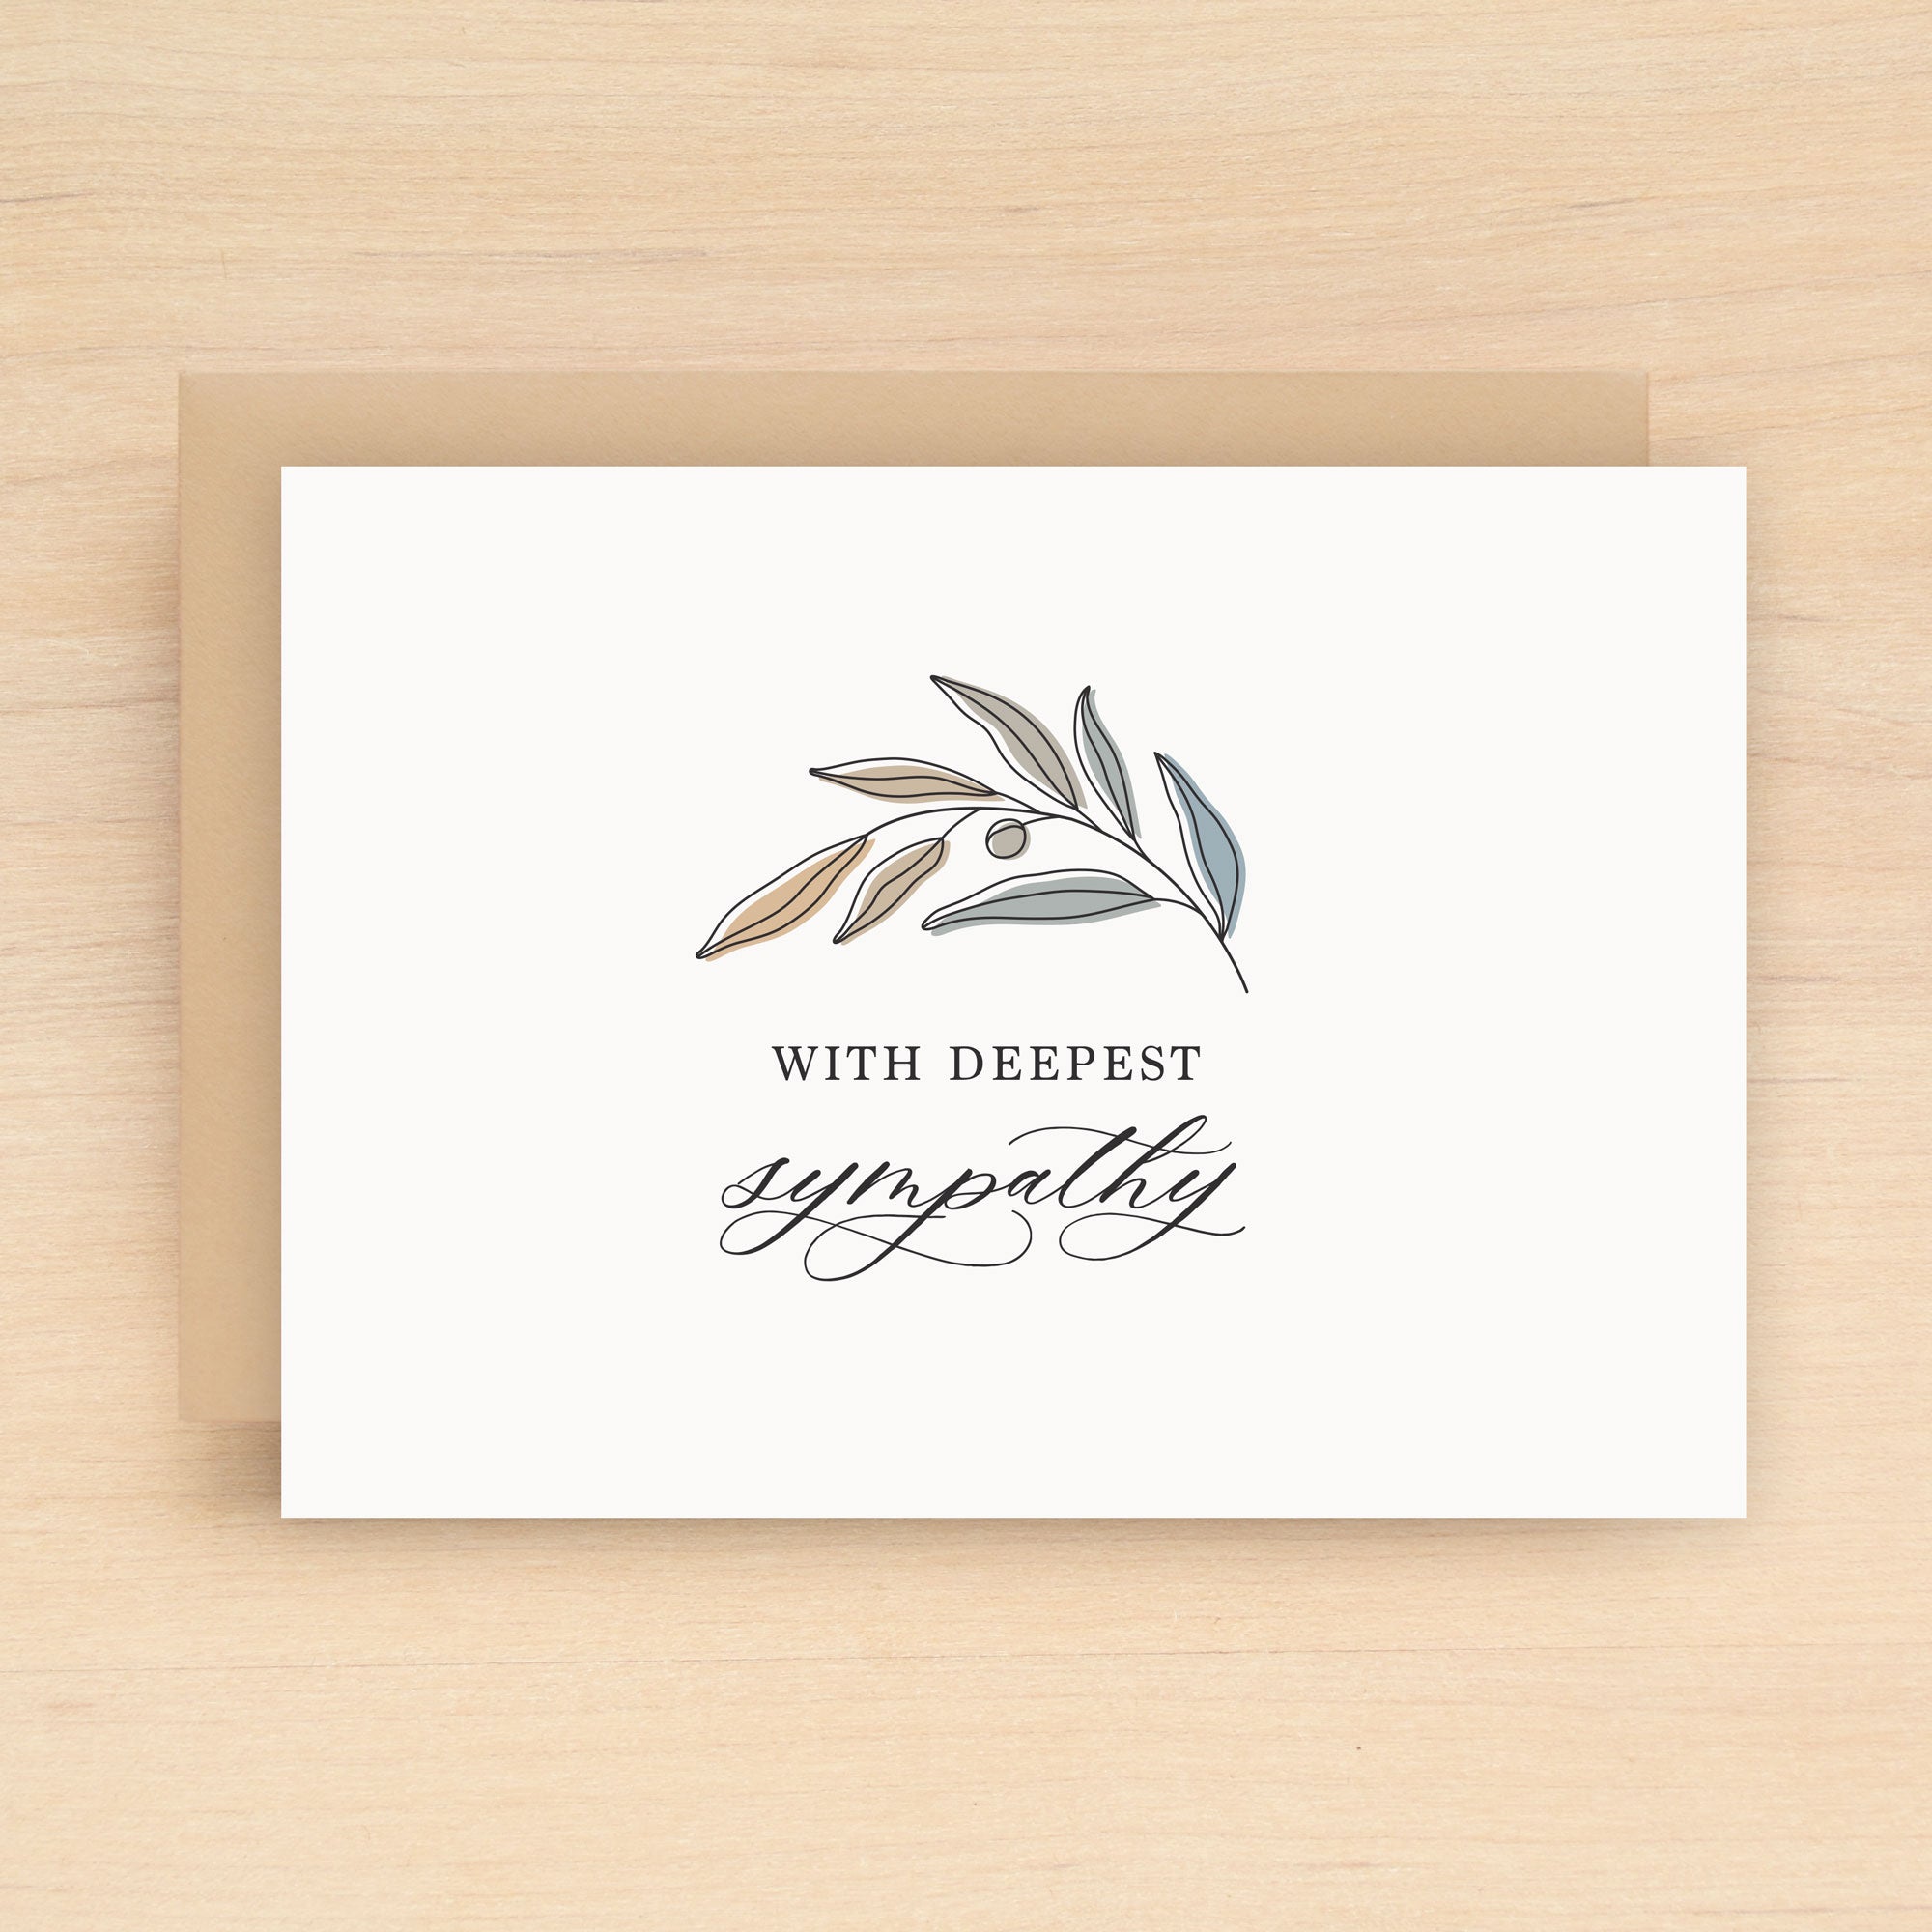 "With deepest sympathy" Olive Sympathy Greeting Card #266